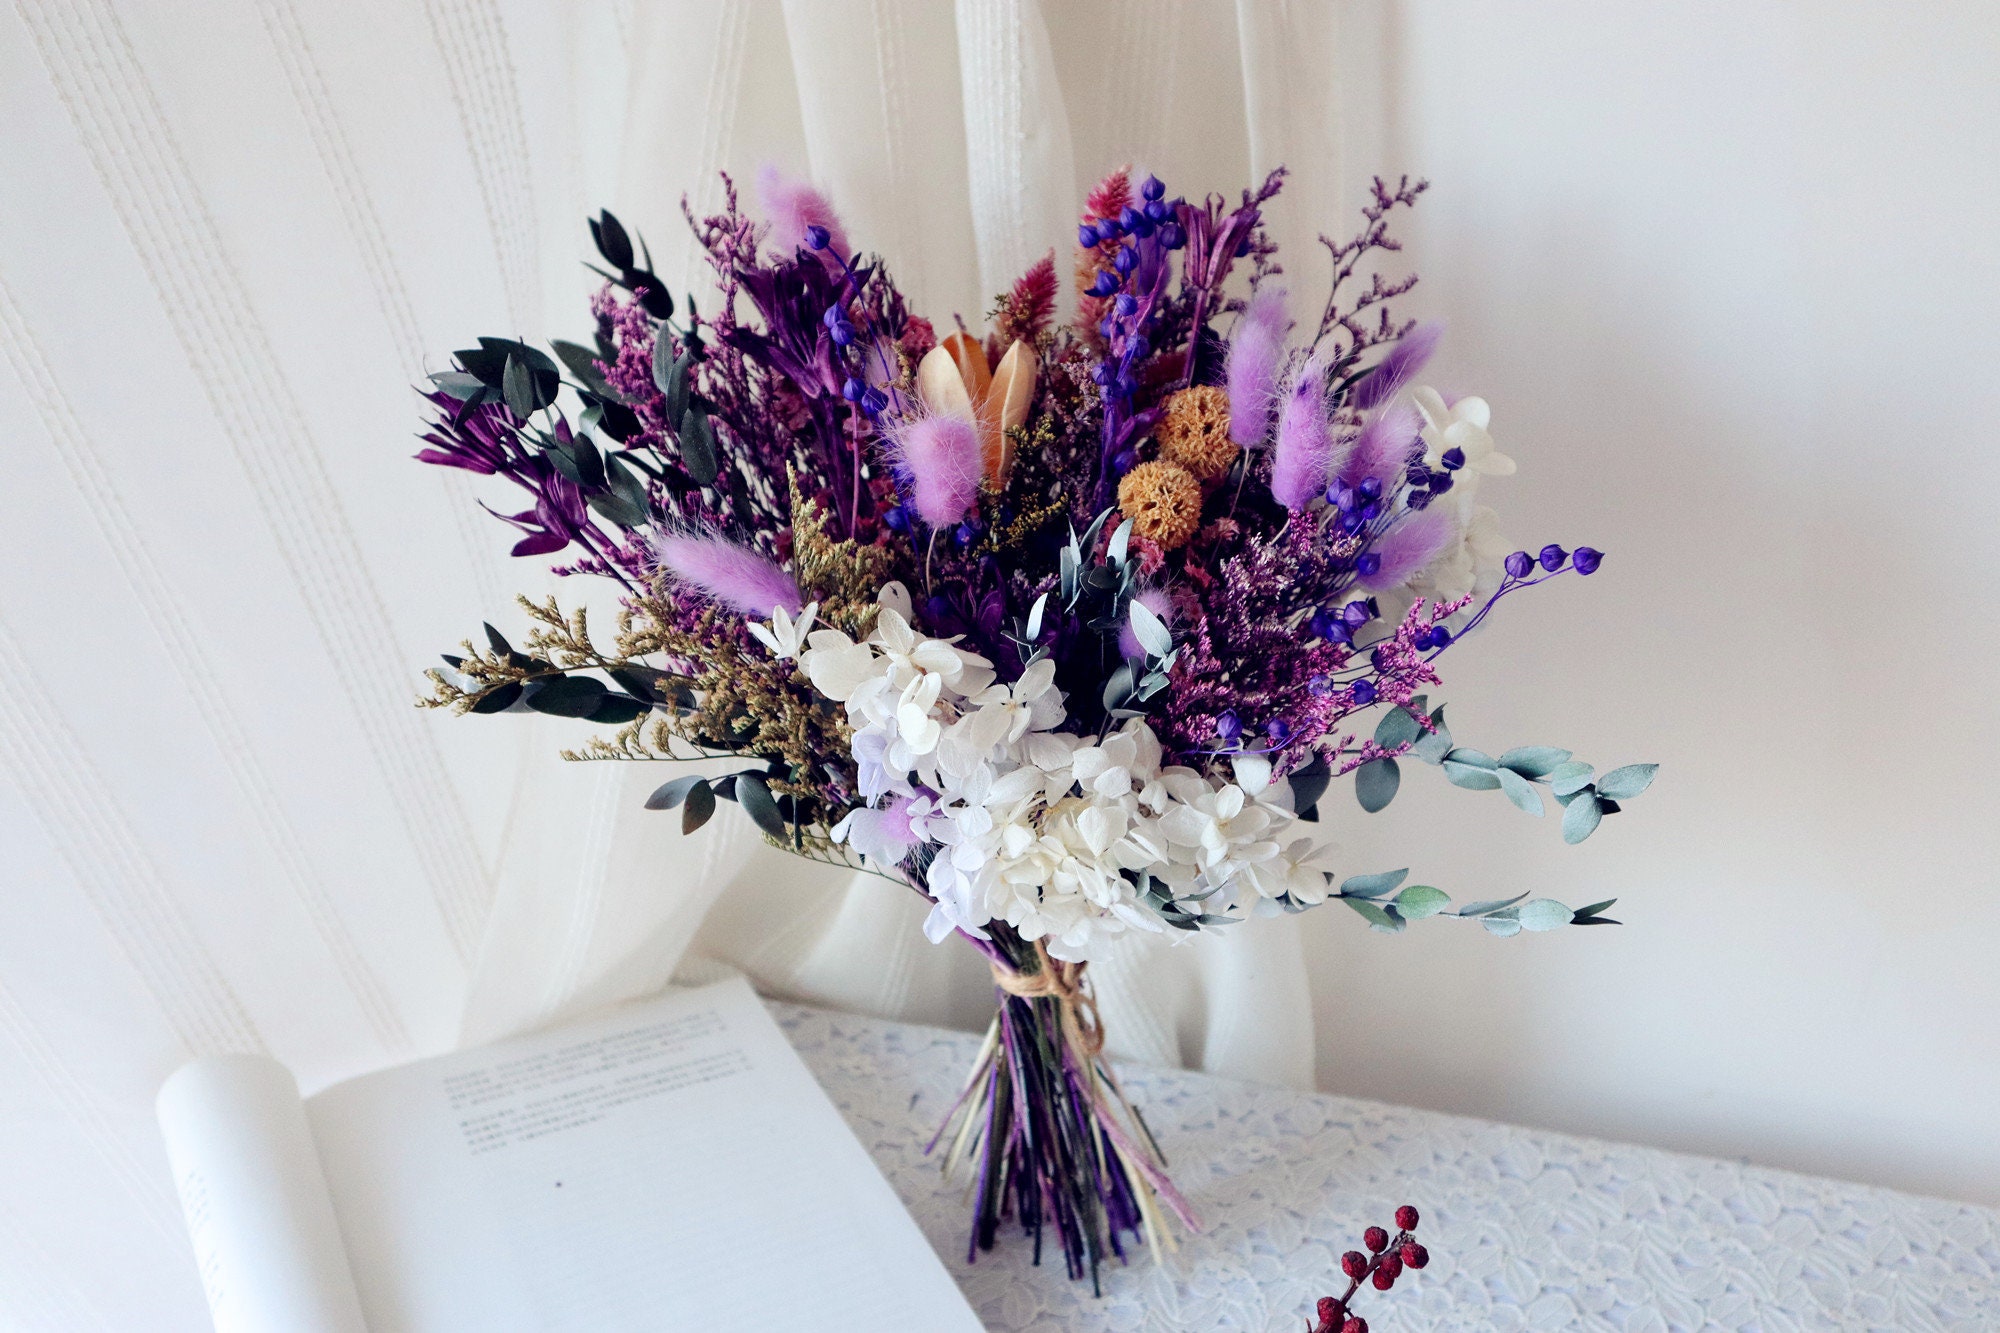 Dried Flowers Bouquets,natural Dried Flowers,natural Flower Decor,weddings,holiday  Decorations,flower Arrangement,small Centerpiece 